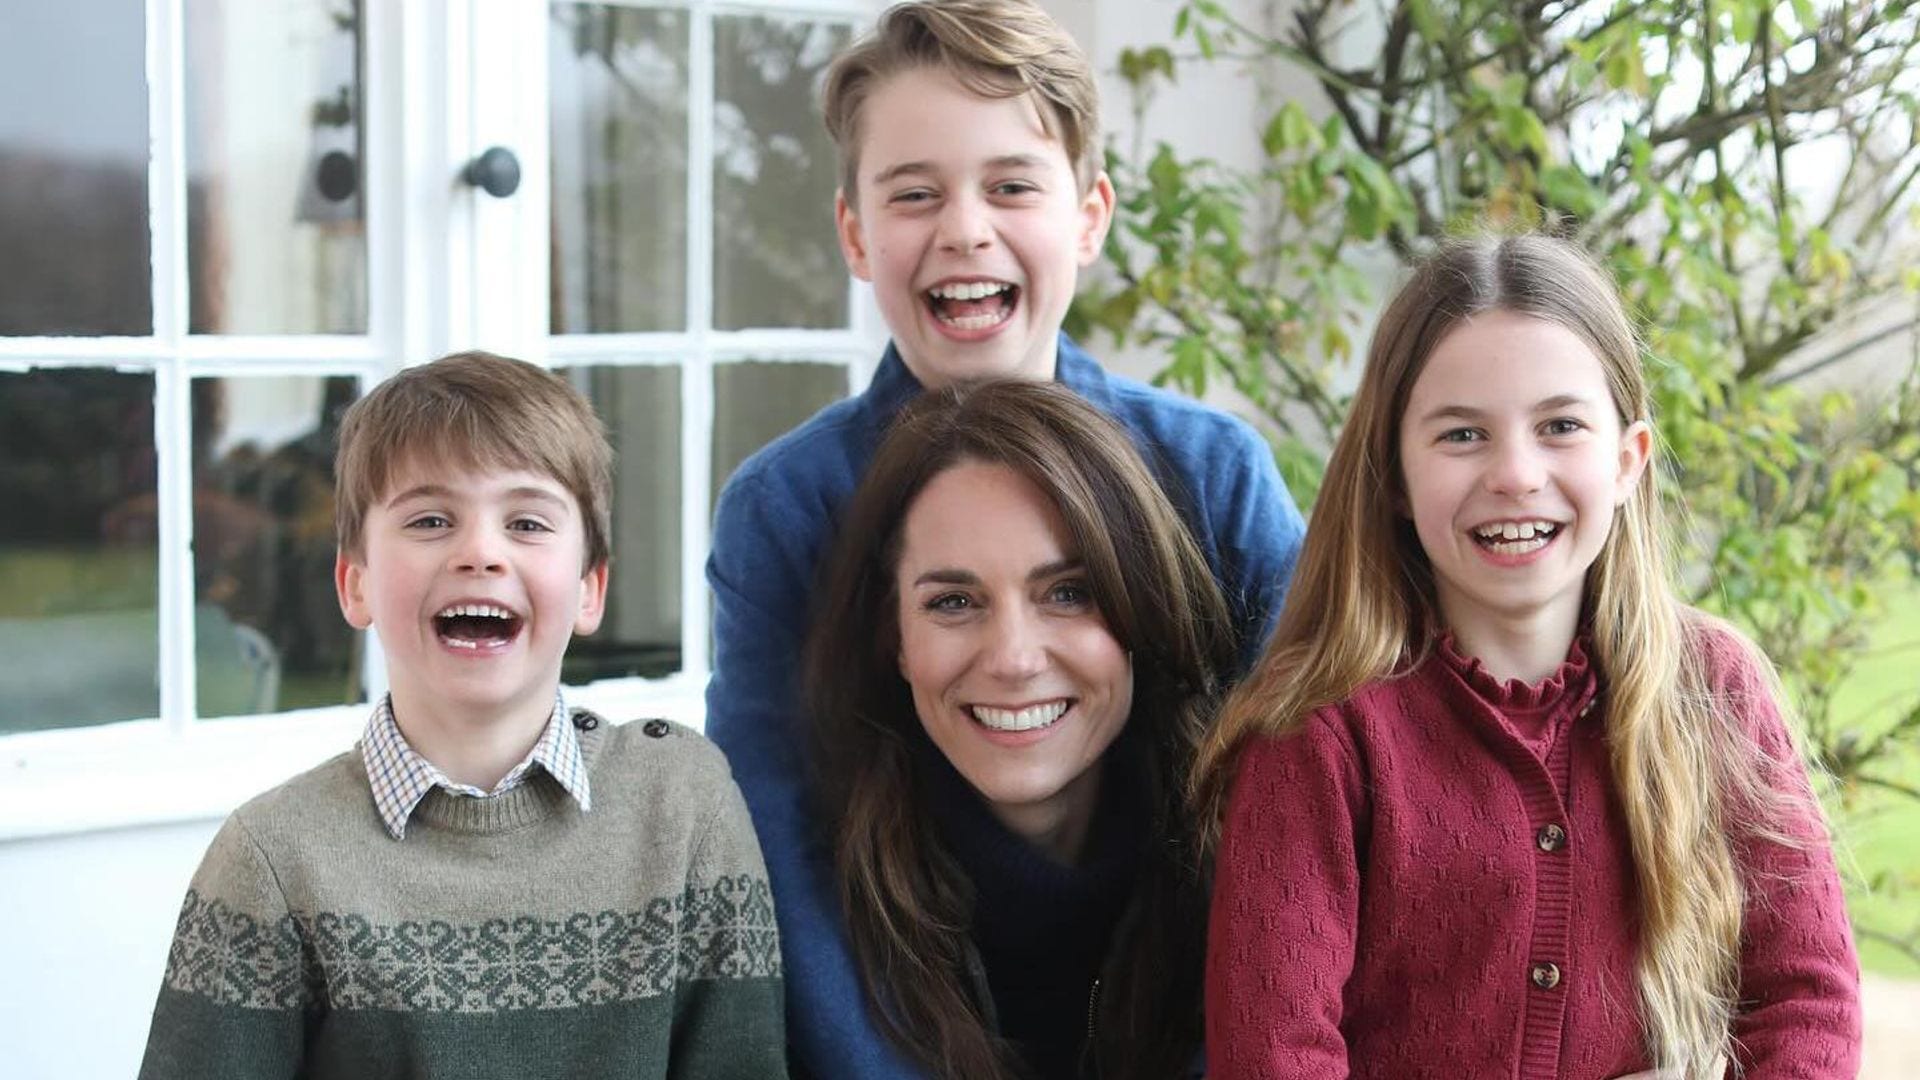 Prince Louis appears to be missing a bottom tooth in the picture with his mom and siblings